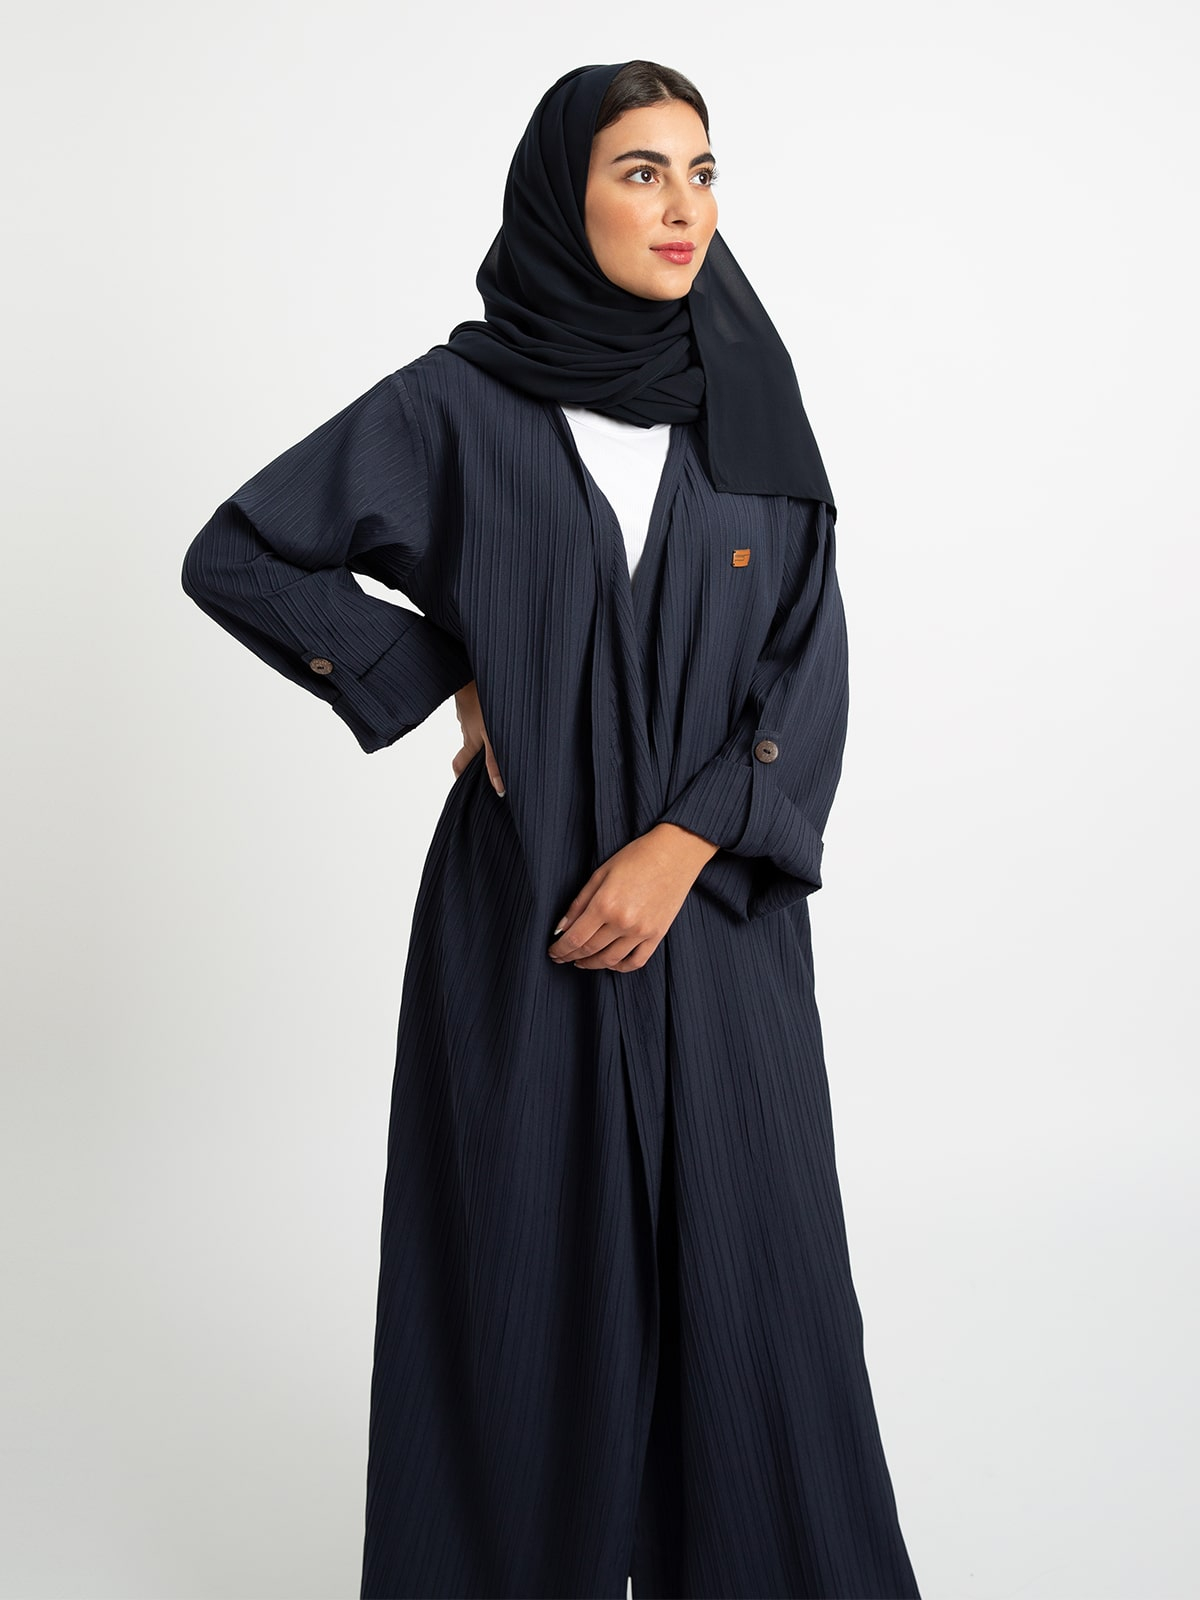 Kaafmeem women clothing regular fit navy comfy long abaya for everyday in wrinkle free fabric for work or outings